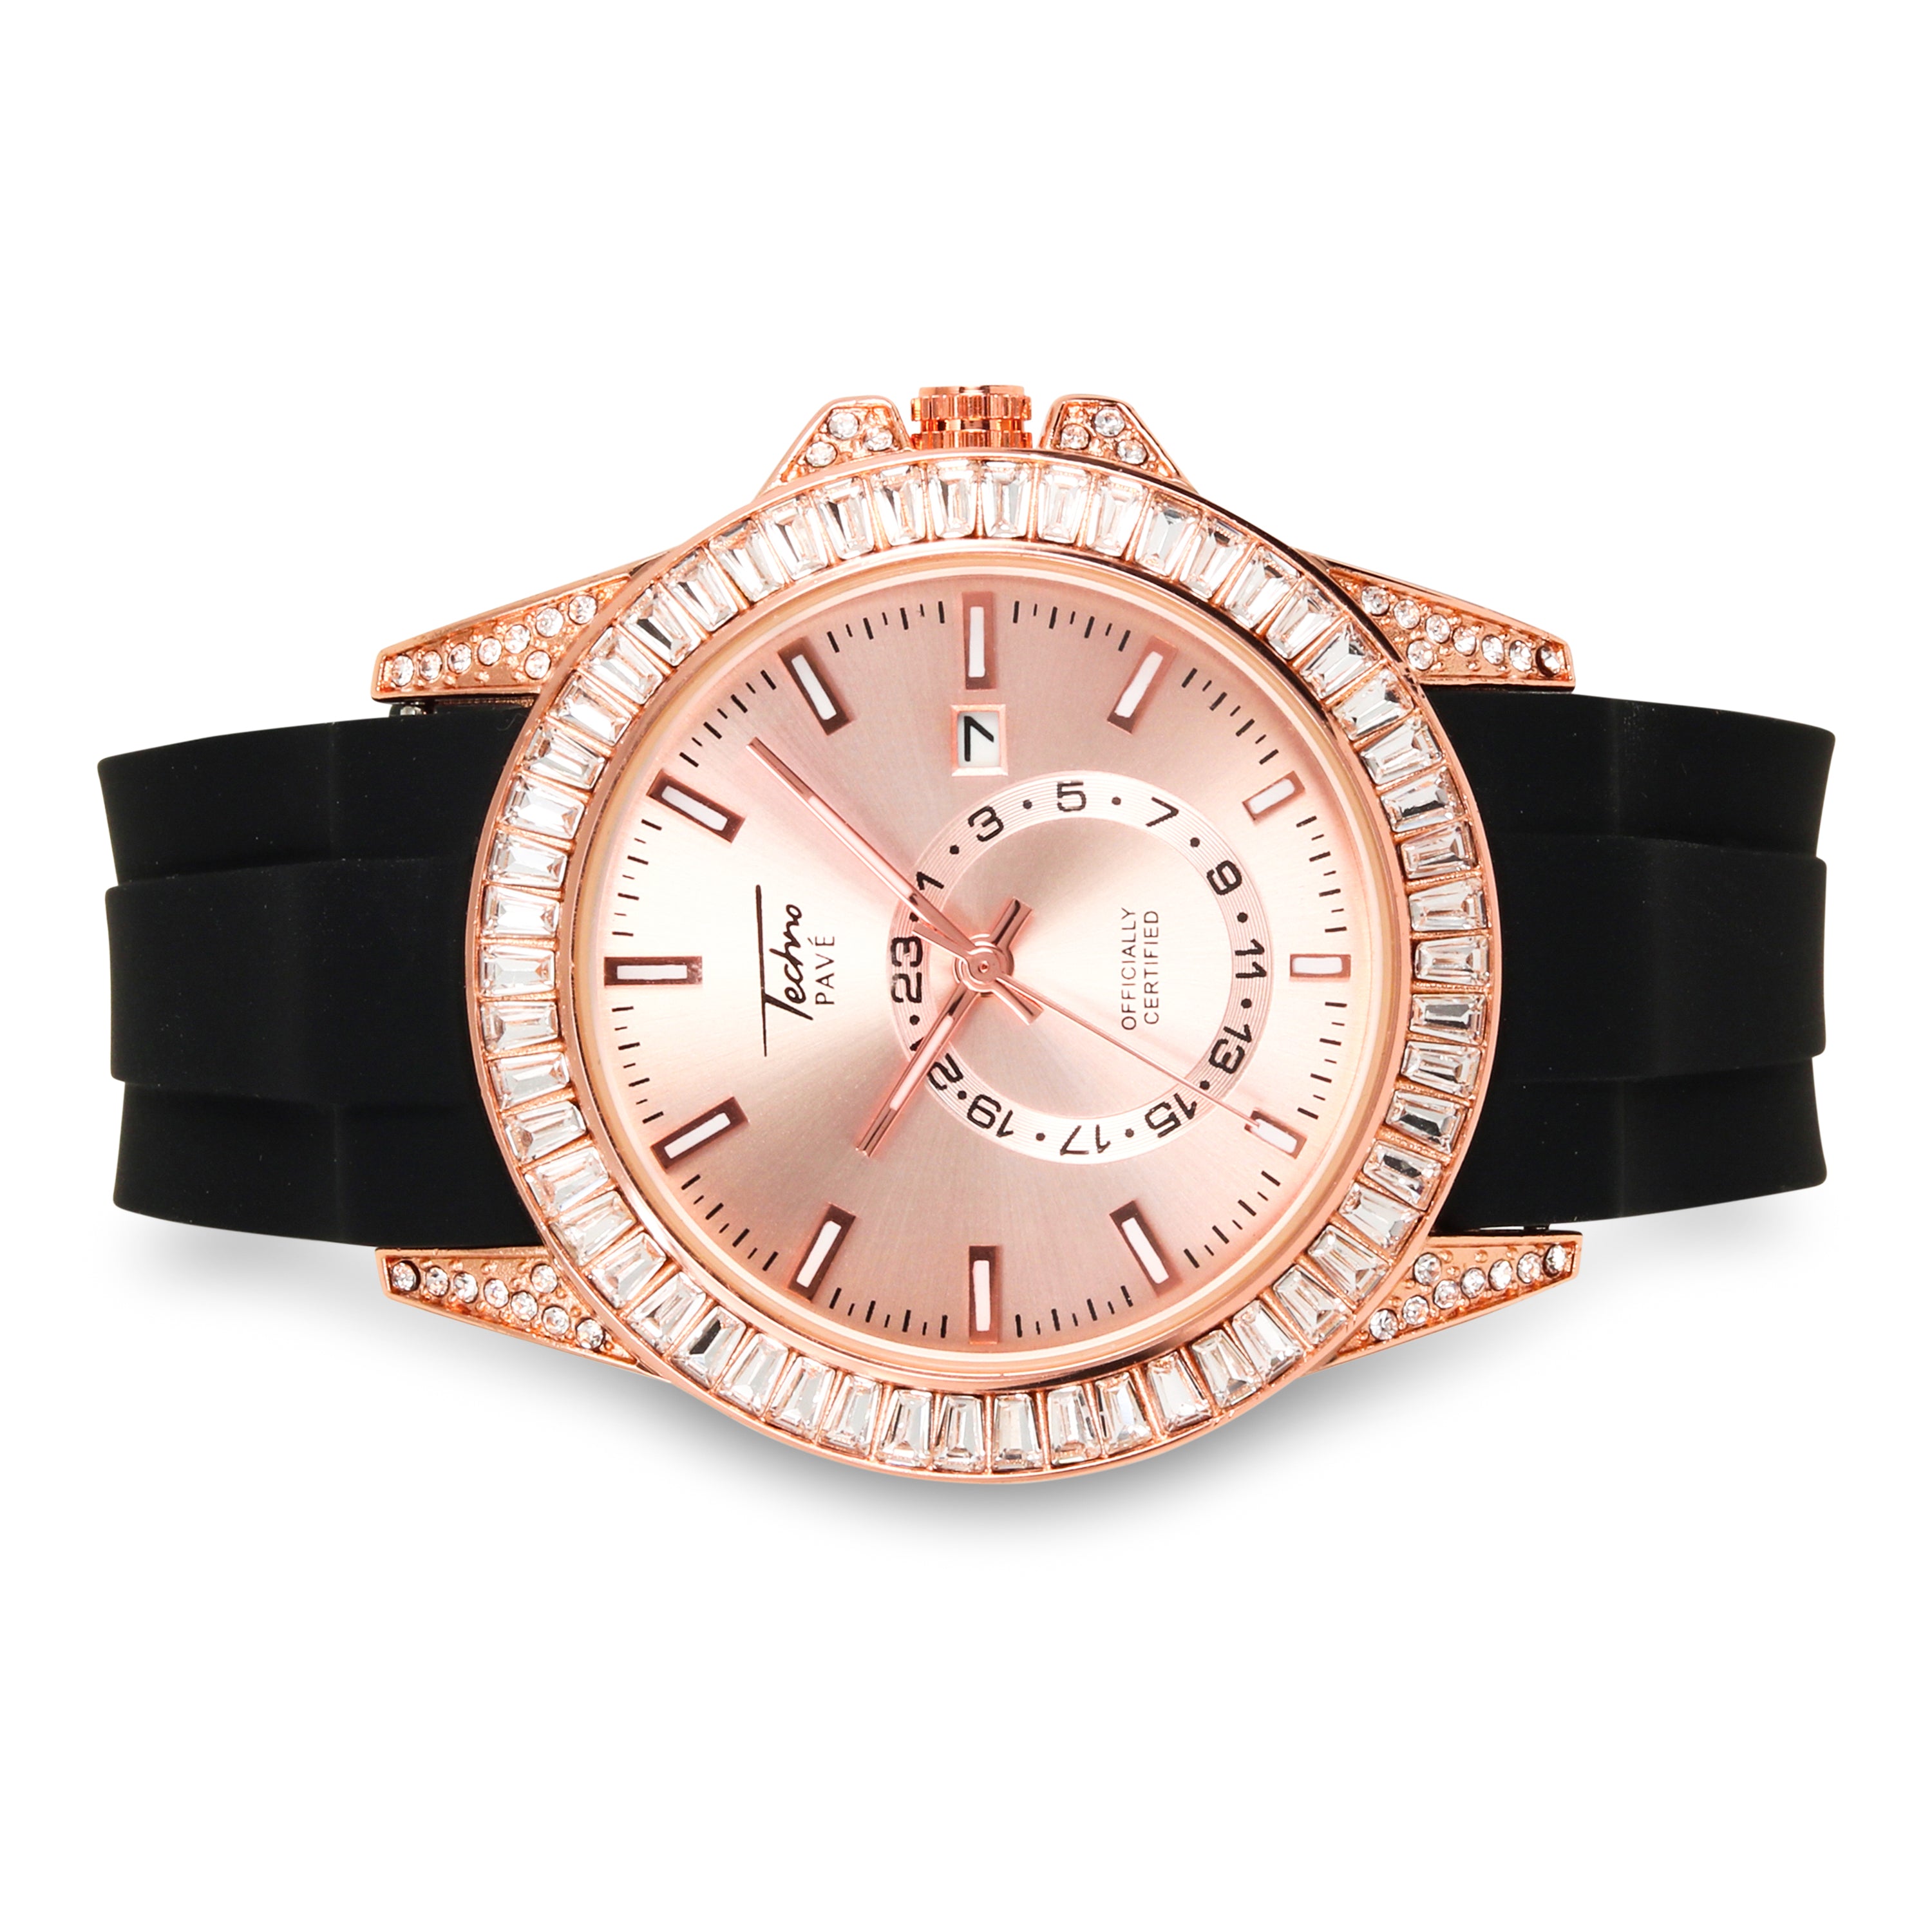 Men's Baguette Iced Out Watch 42mm Rose Gold - Silicon Band